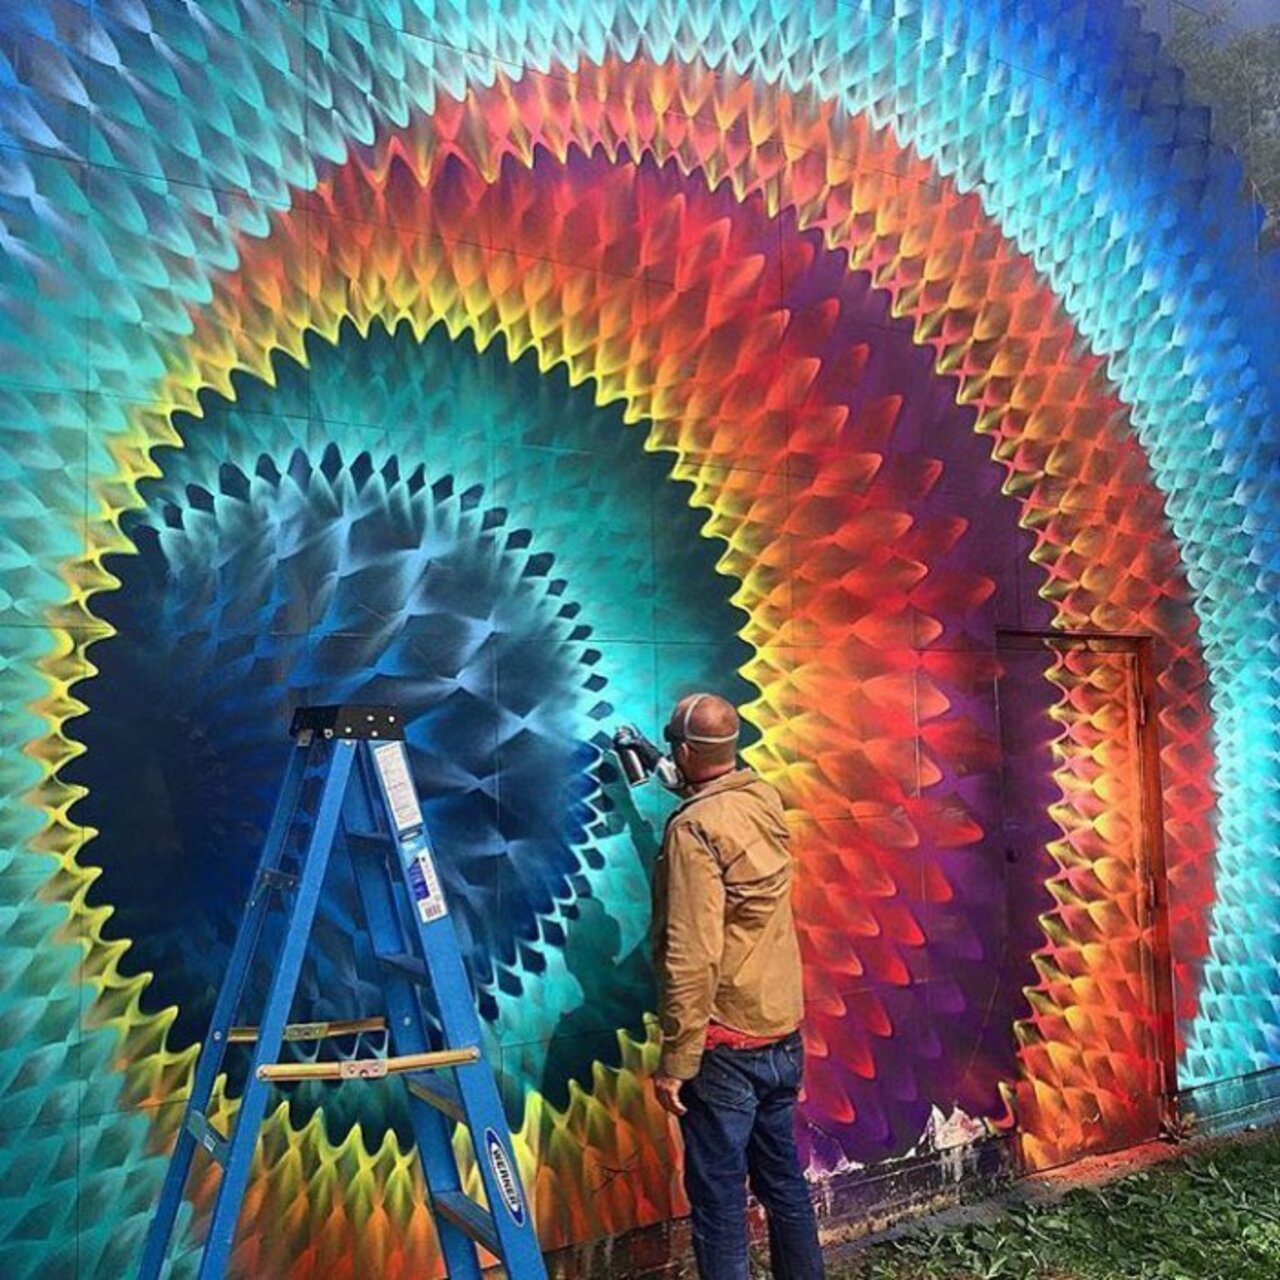 #StreetArt Rainbow – Creative Colours | Be ▲rtist - Be ▲rt https://beartistbeart.com/2016/06/23/streetart-rainbow-creative-colours/?utm_campaign=crowdfire&utm_content=crowdfire&utm_medium=social&utm_source=twitter https://t.co/AF0Lw8eQpi